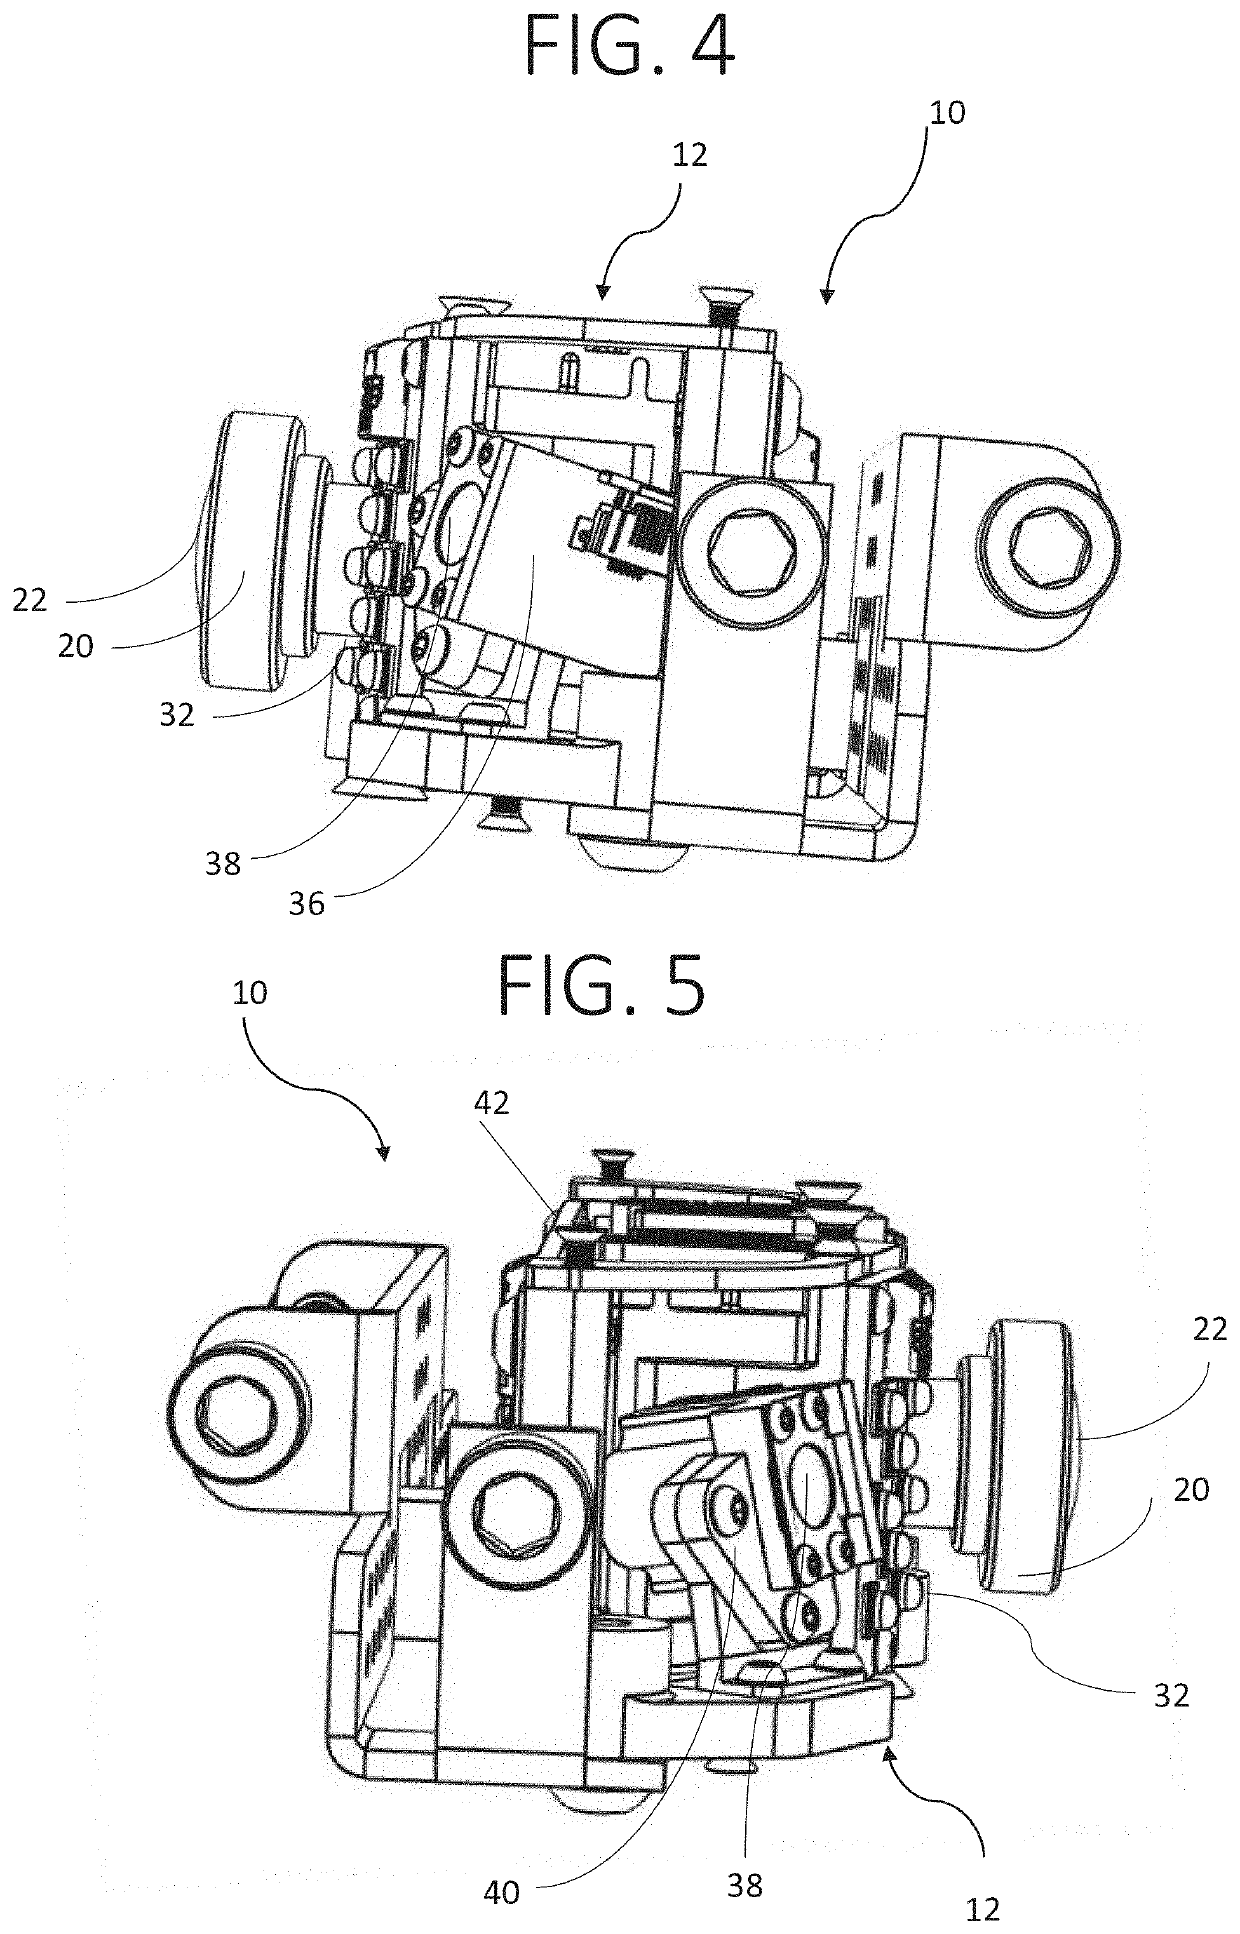 Device for monitoring vehicle occupant(s)